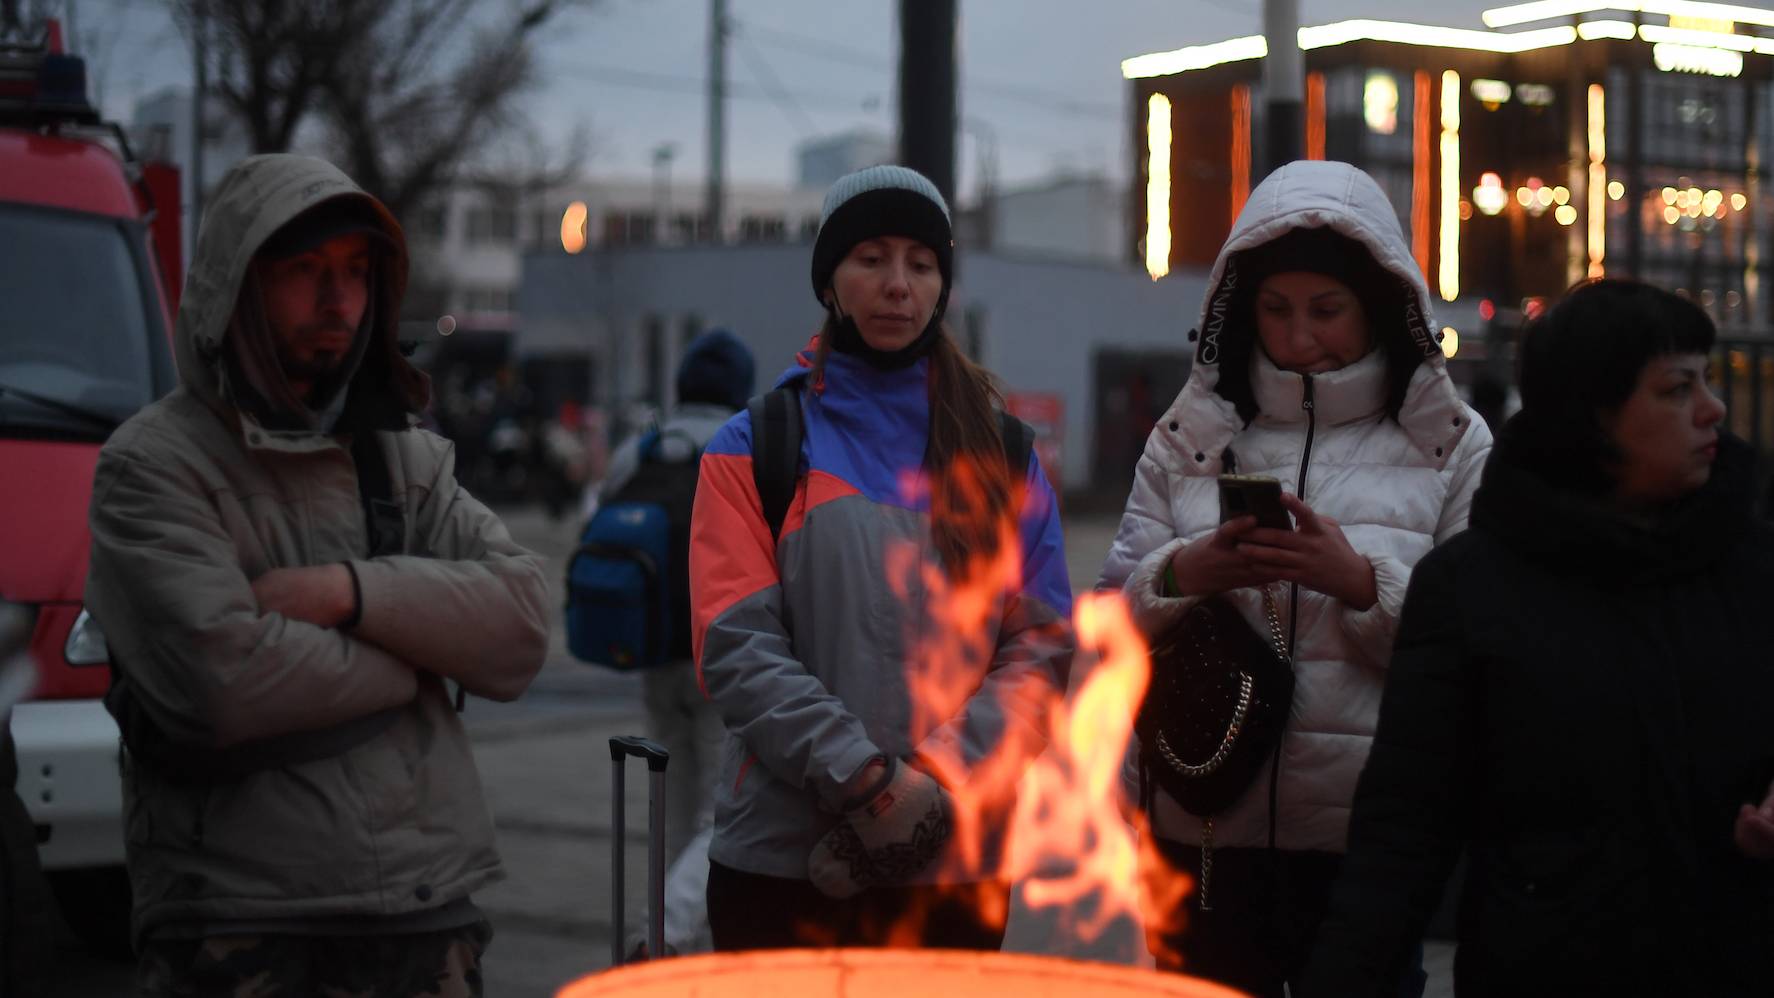 Refugees warm up around a bonfire outside the Lviv train station, western Ukraine, on March 03, 2022. - Ukraine and Russia agreed to create humanitarian corridors to evacuate civilians on March 03 in a second round of talks since Moscow invaded last week, a top Ukrainian official said. (Photo by